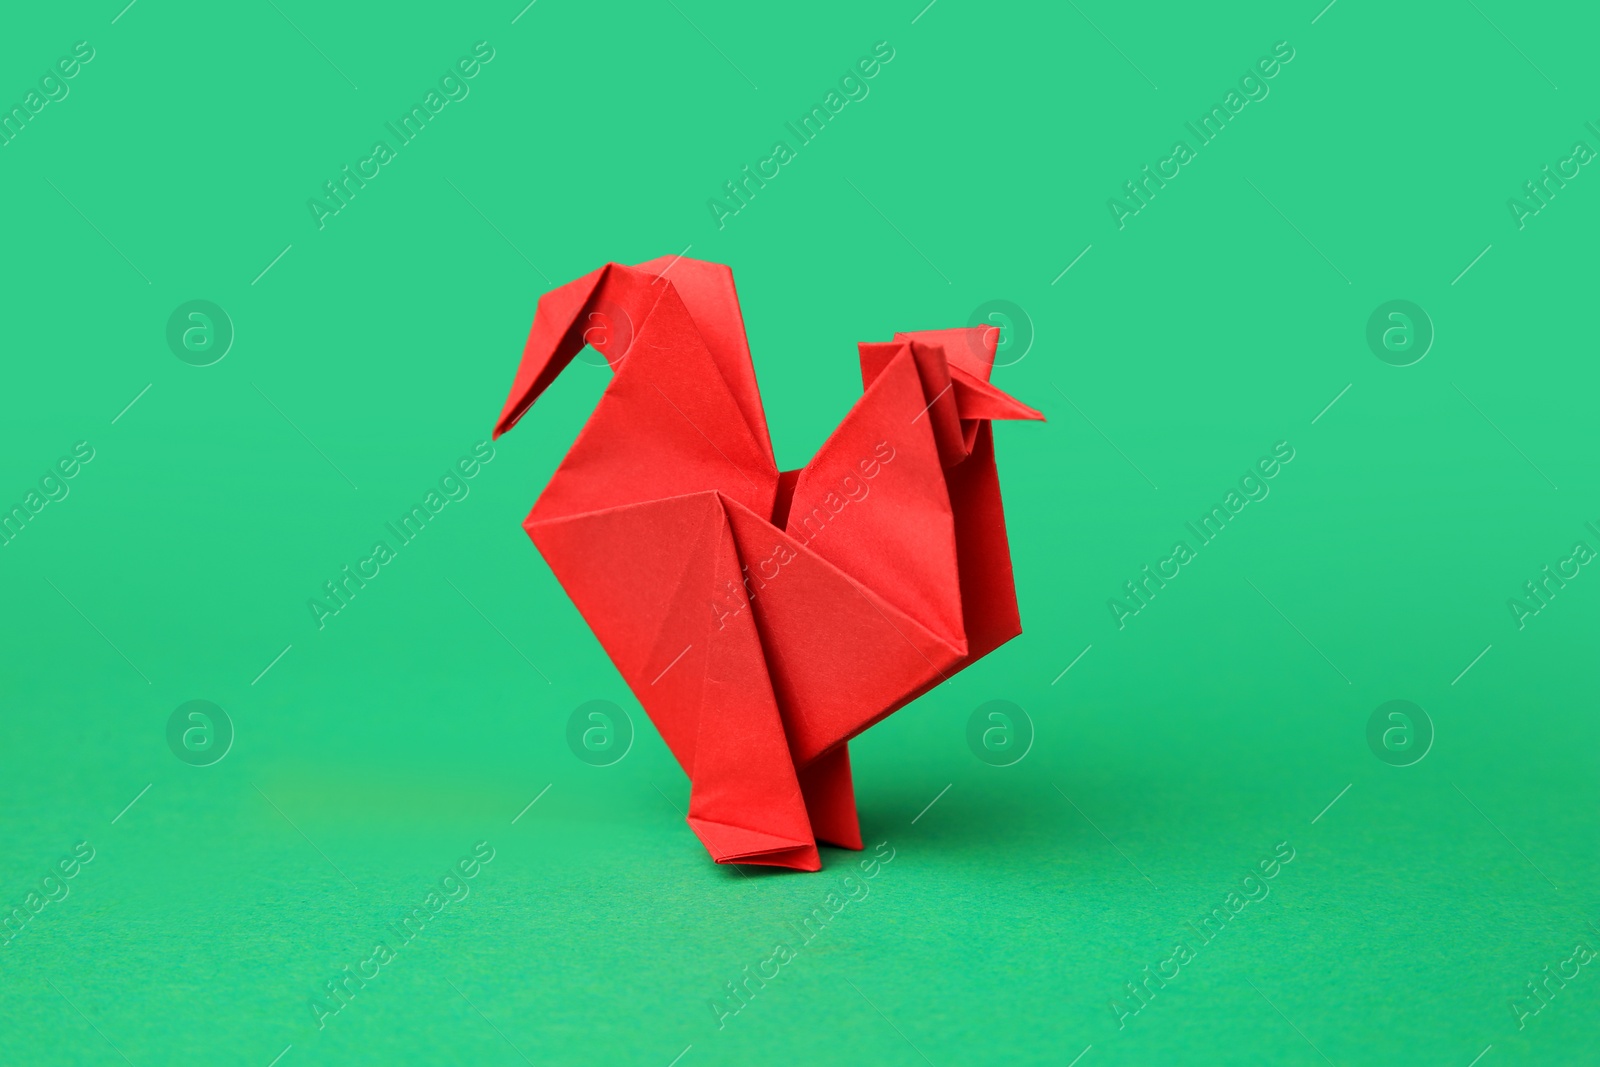 Photo of Origami art. Handmade red paper rooster on green background